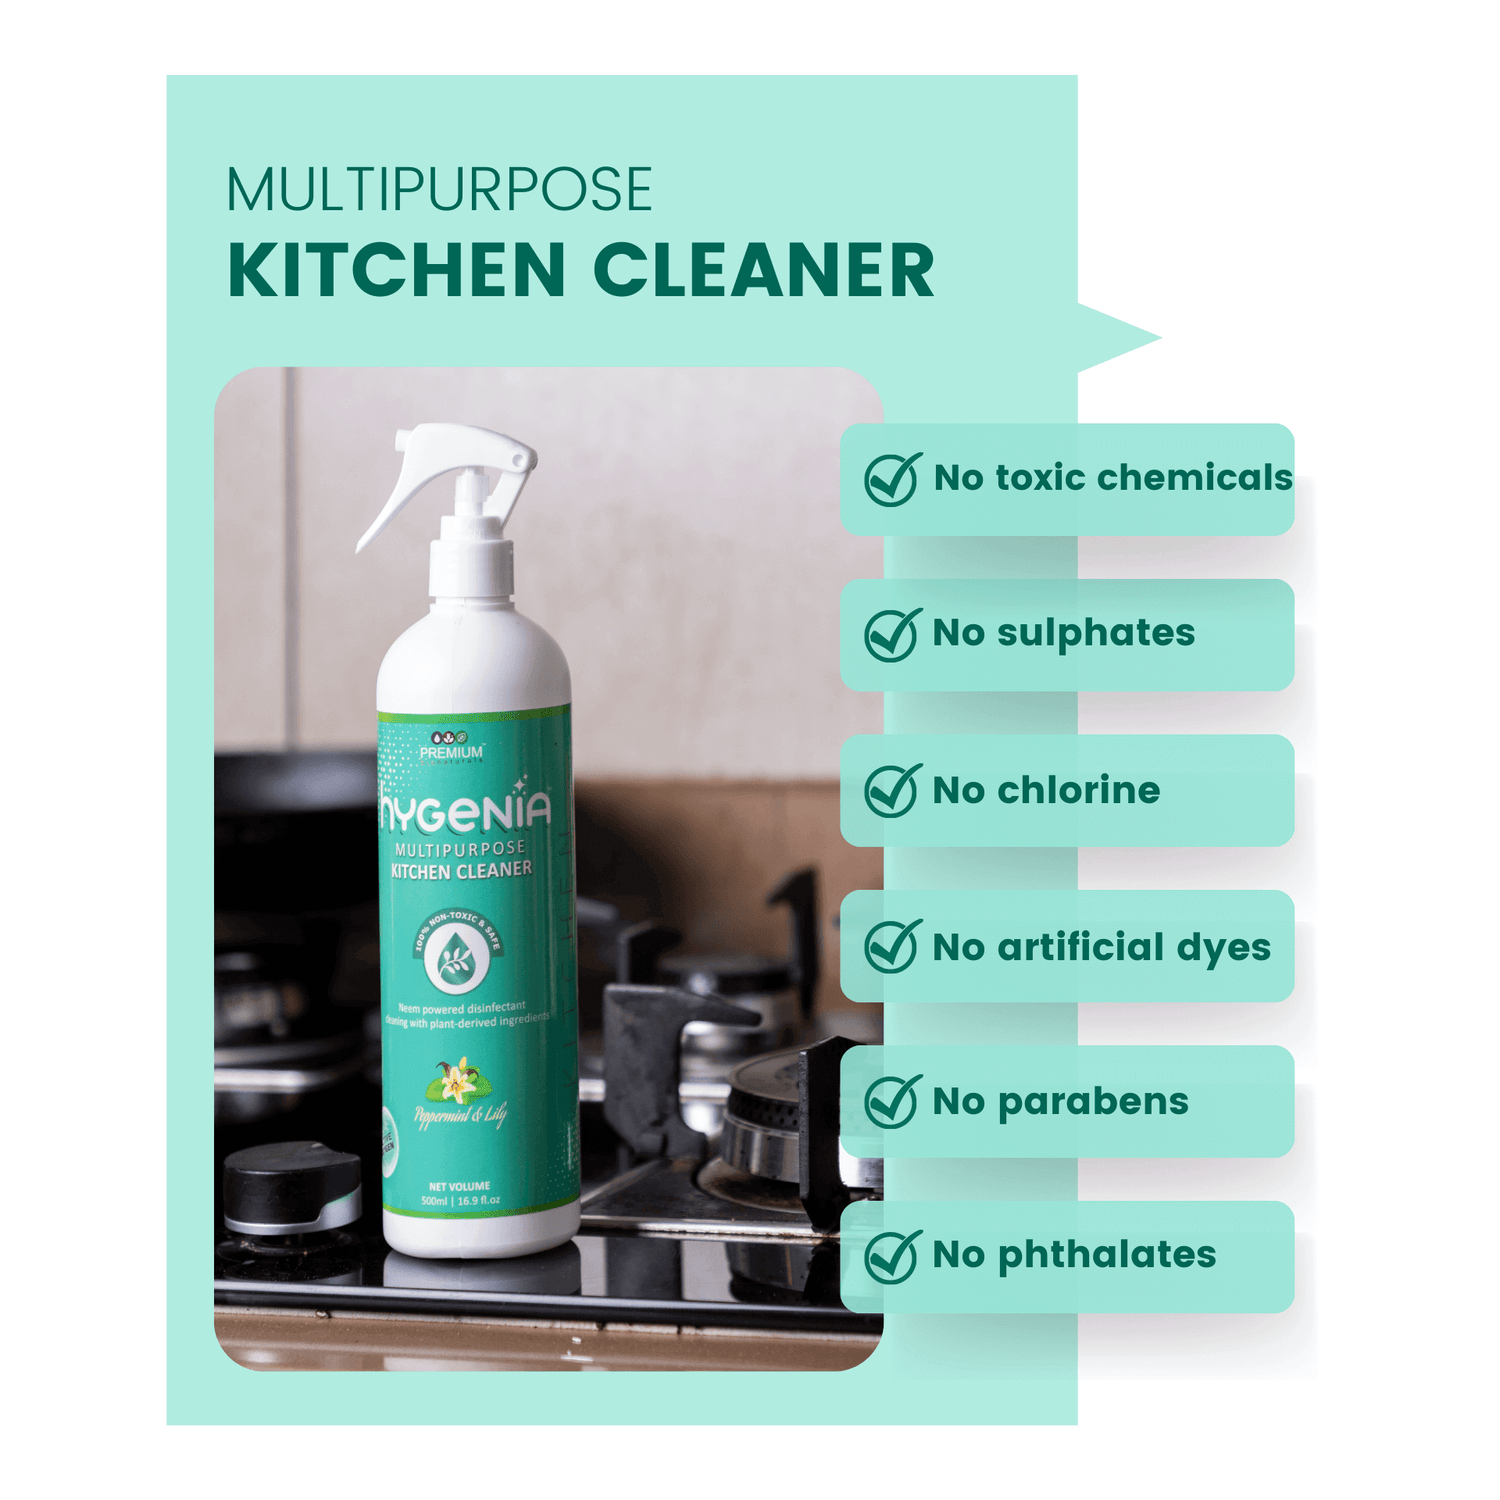 Discover our most powerful kitchen cleaner that is tough on stains and safe for kitchen appliances and countertops.